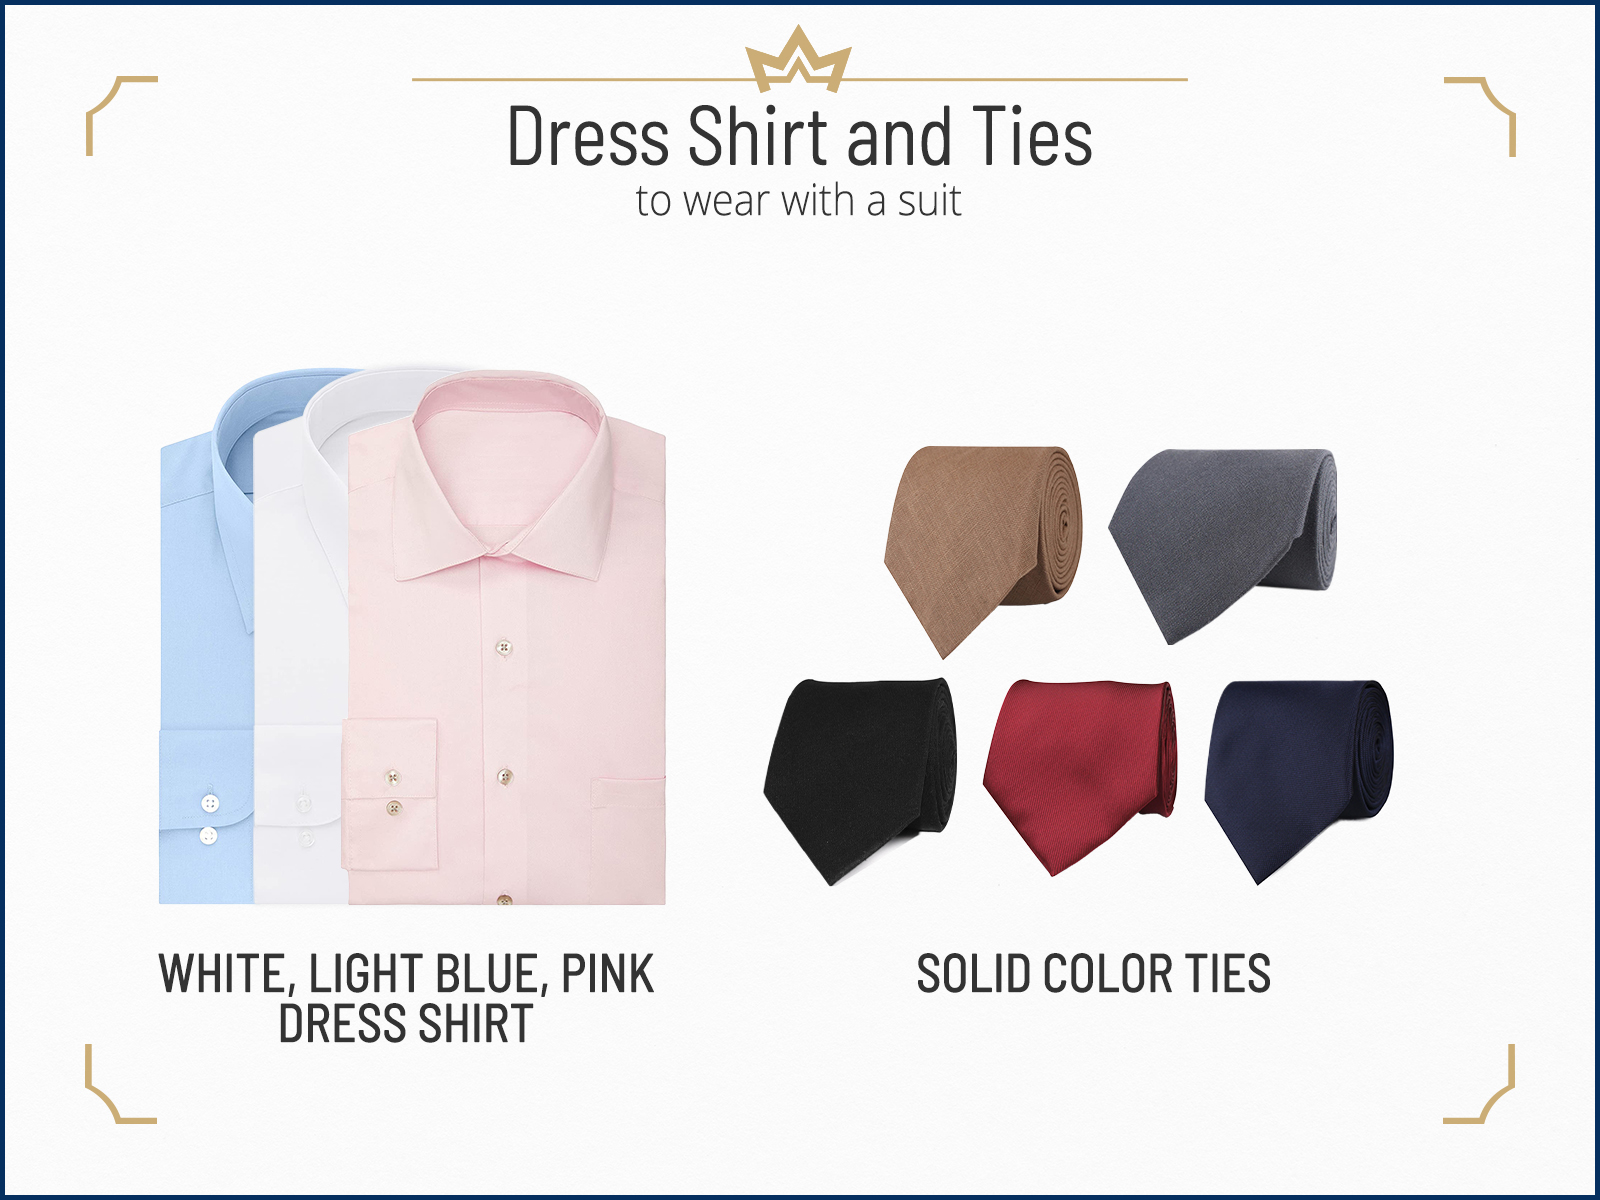 Standard dress shirt and tie color matching choices to wear with a suit